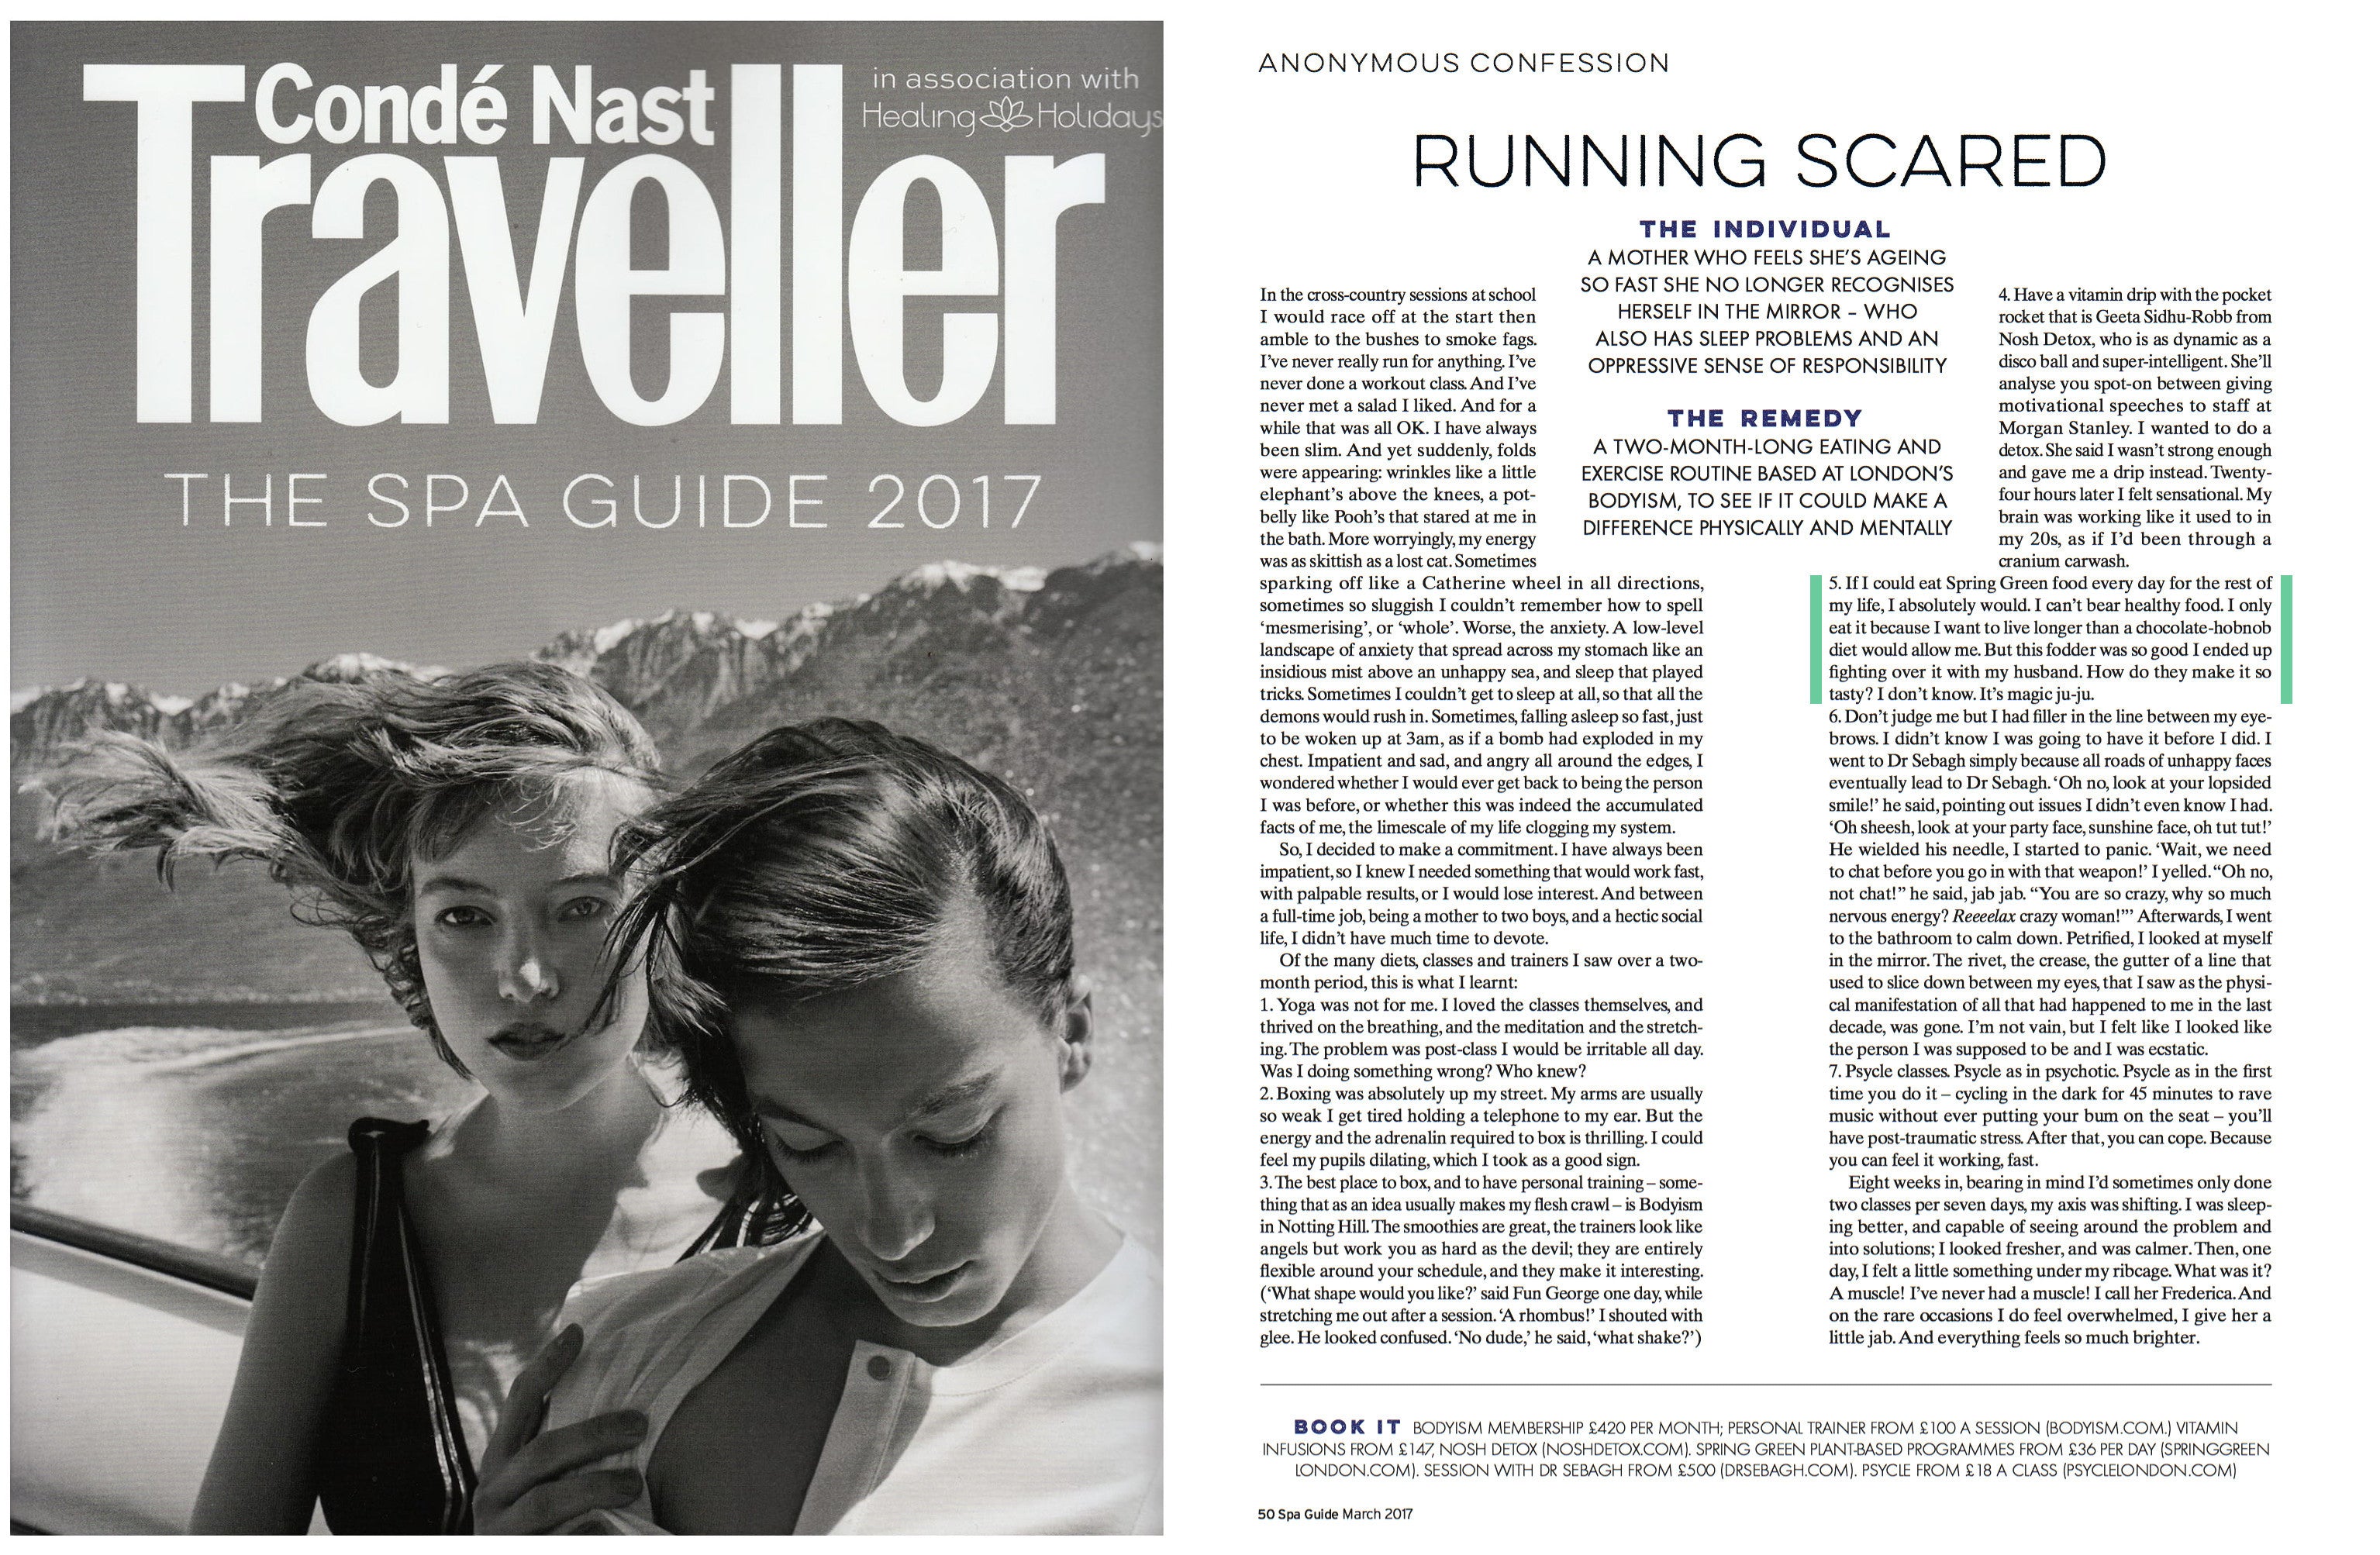 Conde Nast Traveler Spa Guide 2017 featuring Spring Green London